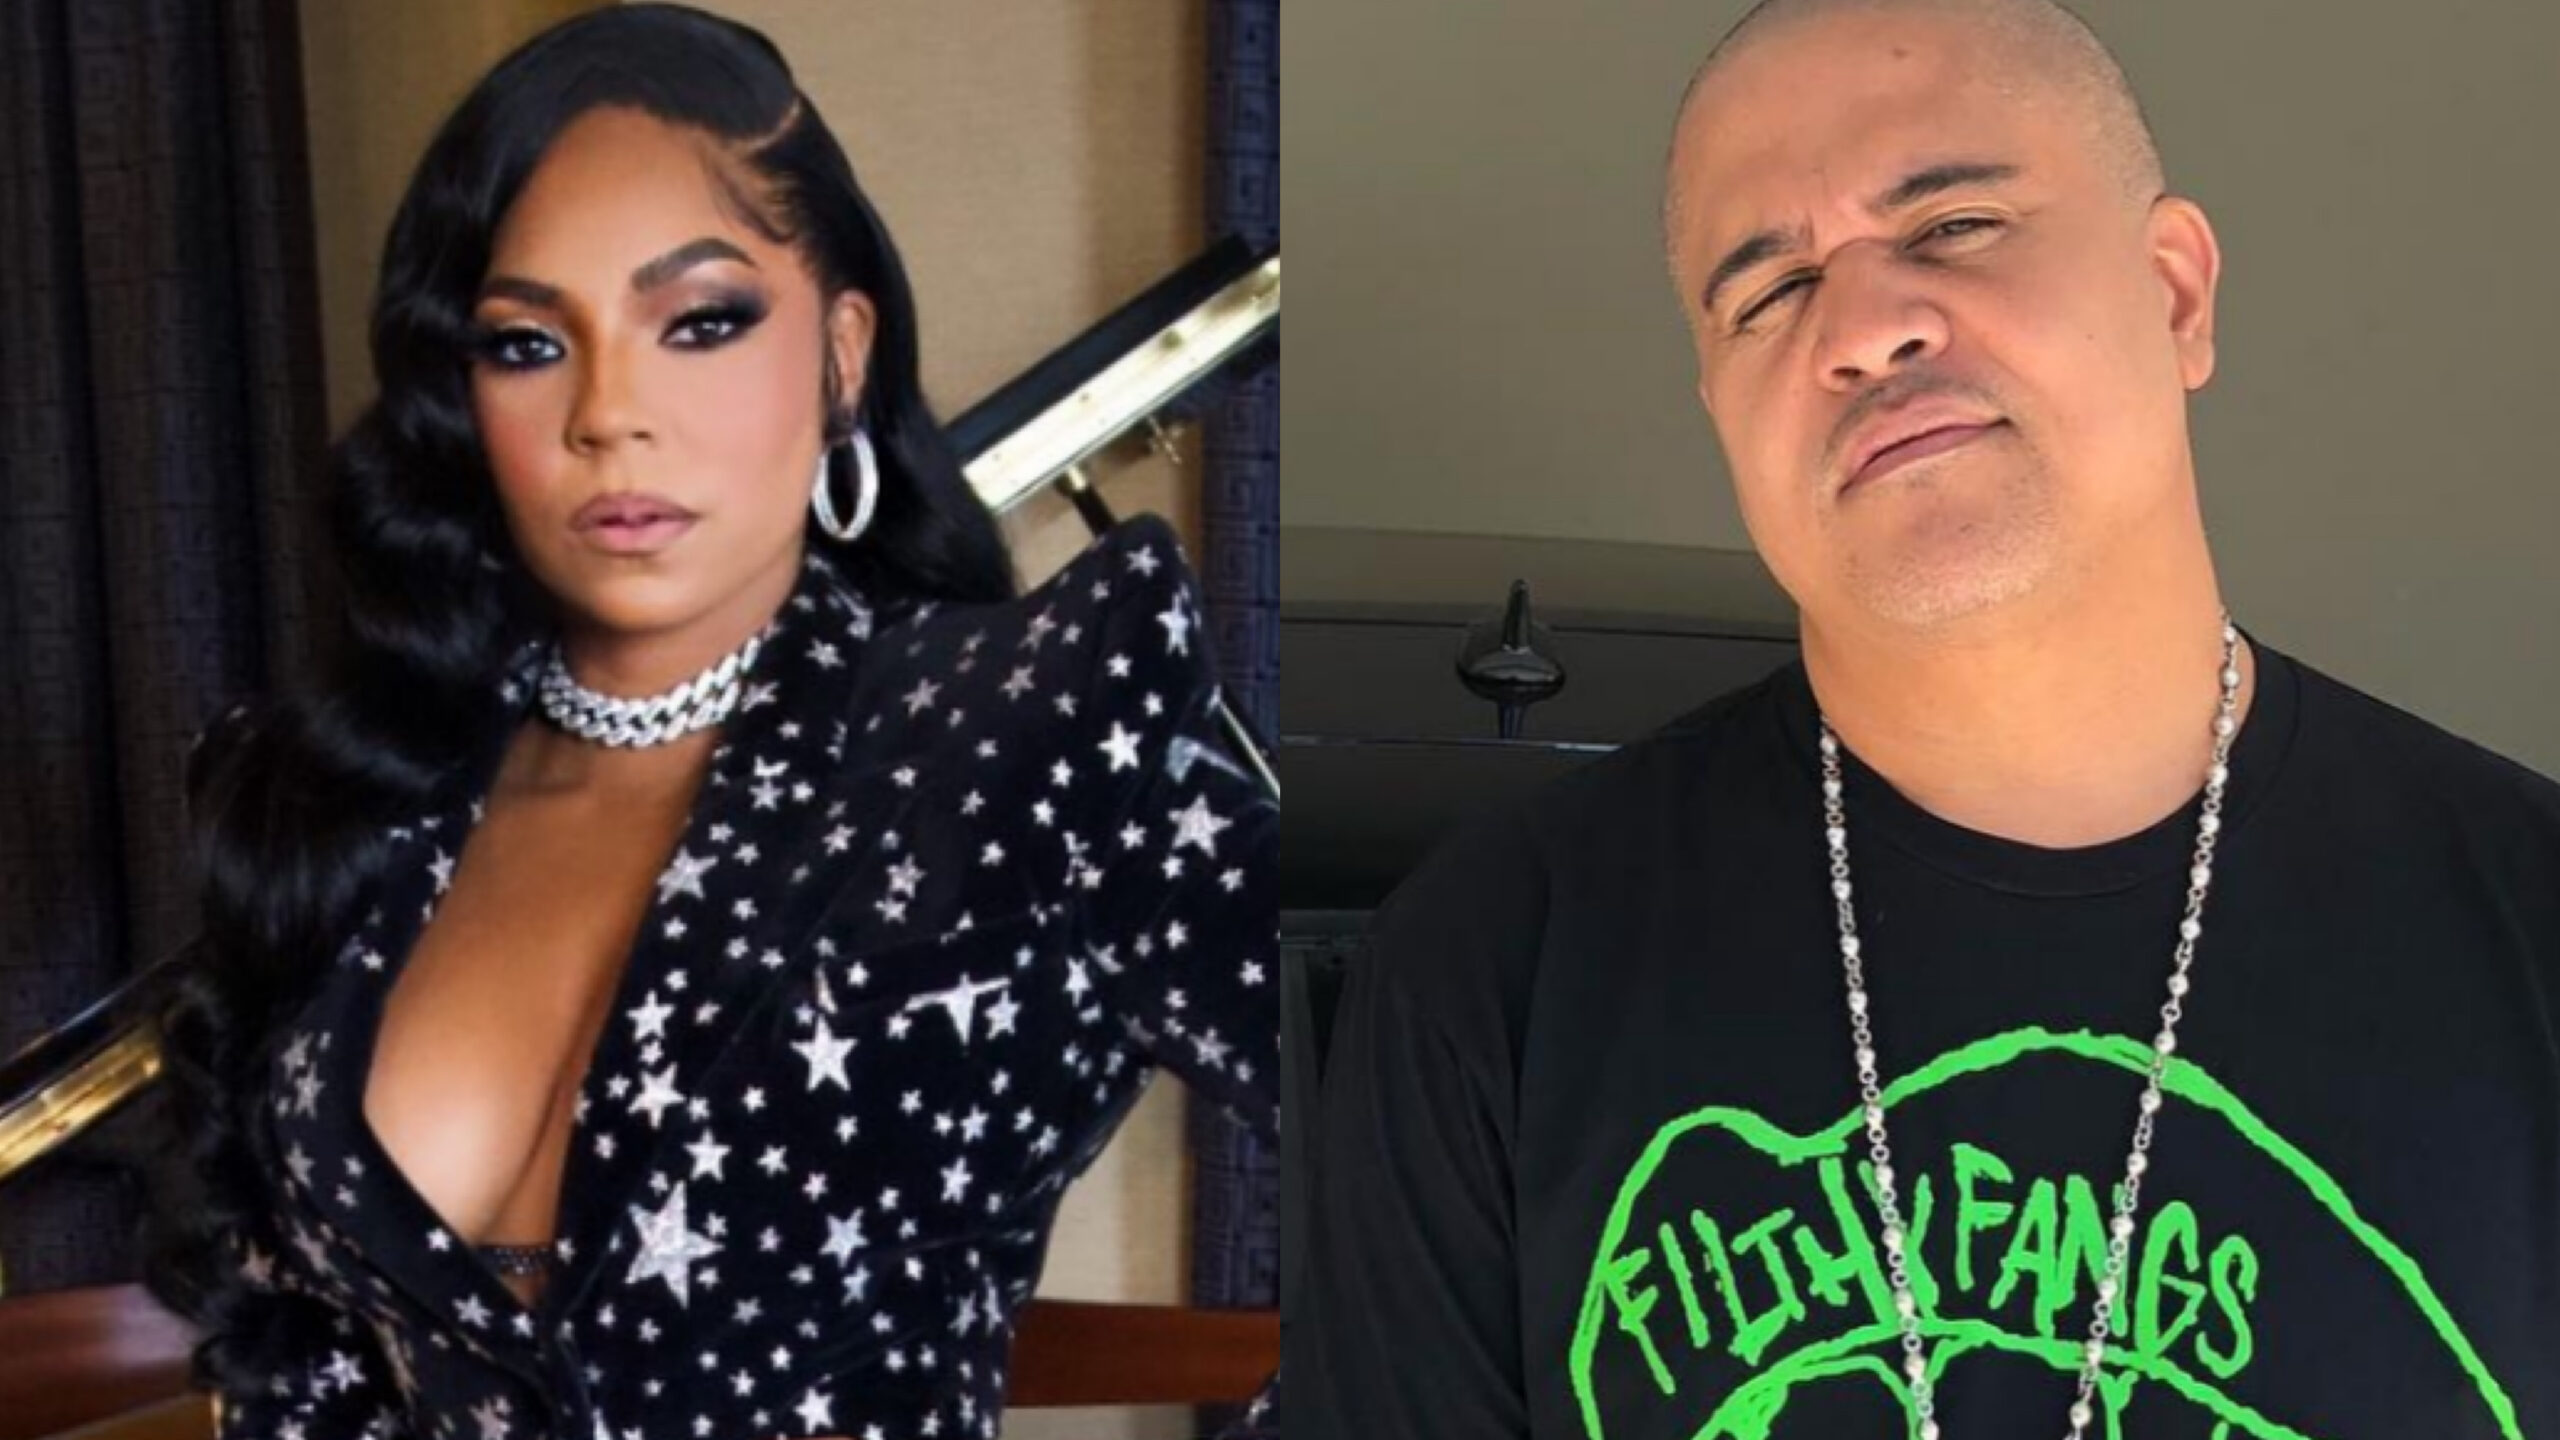 Ashanti Fans Blast Irv Gotti as He Reveals Alleged Details About His First Kiss with the Singer